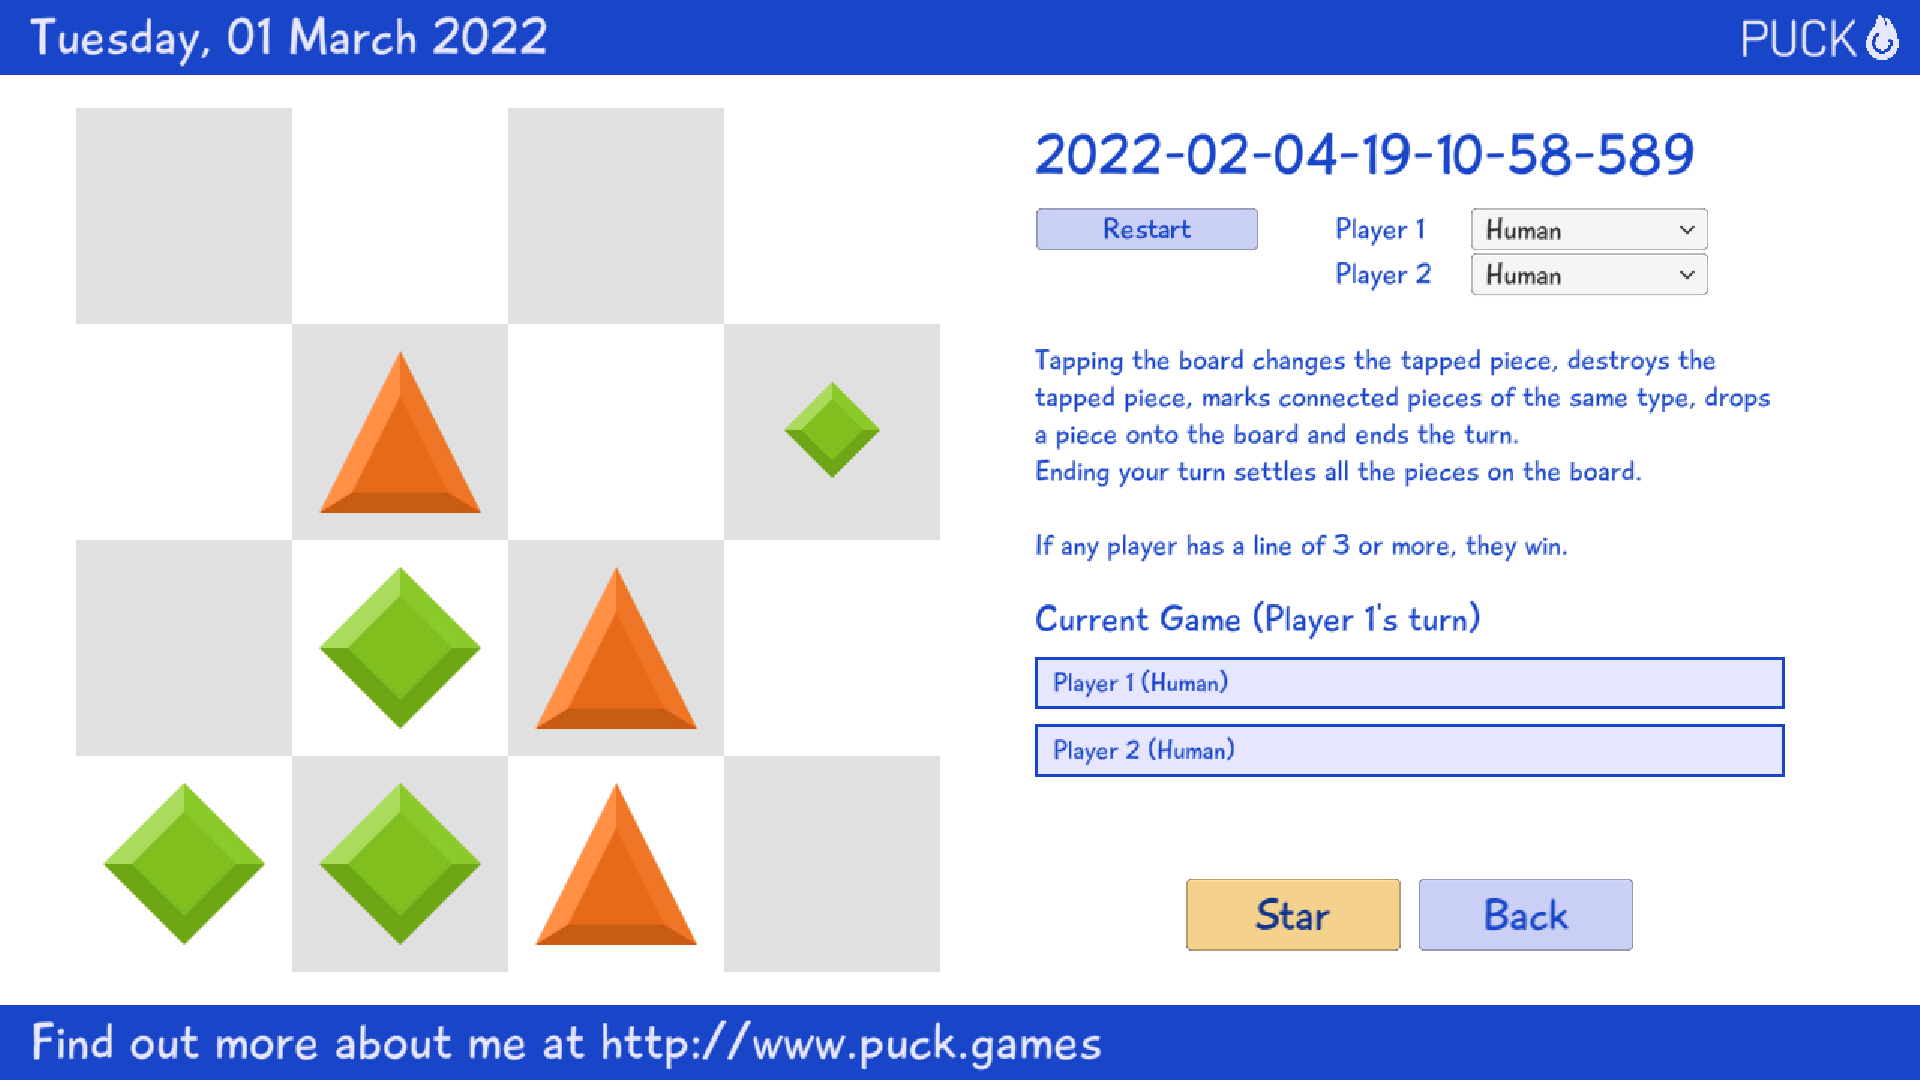 Example of the Puck game interface